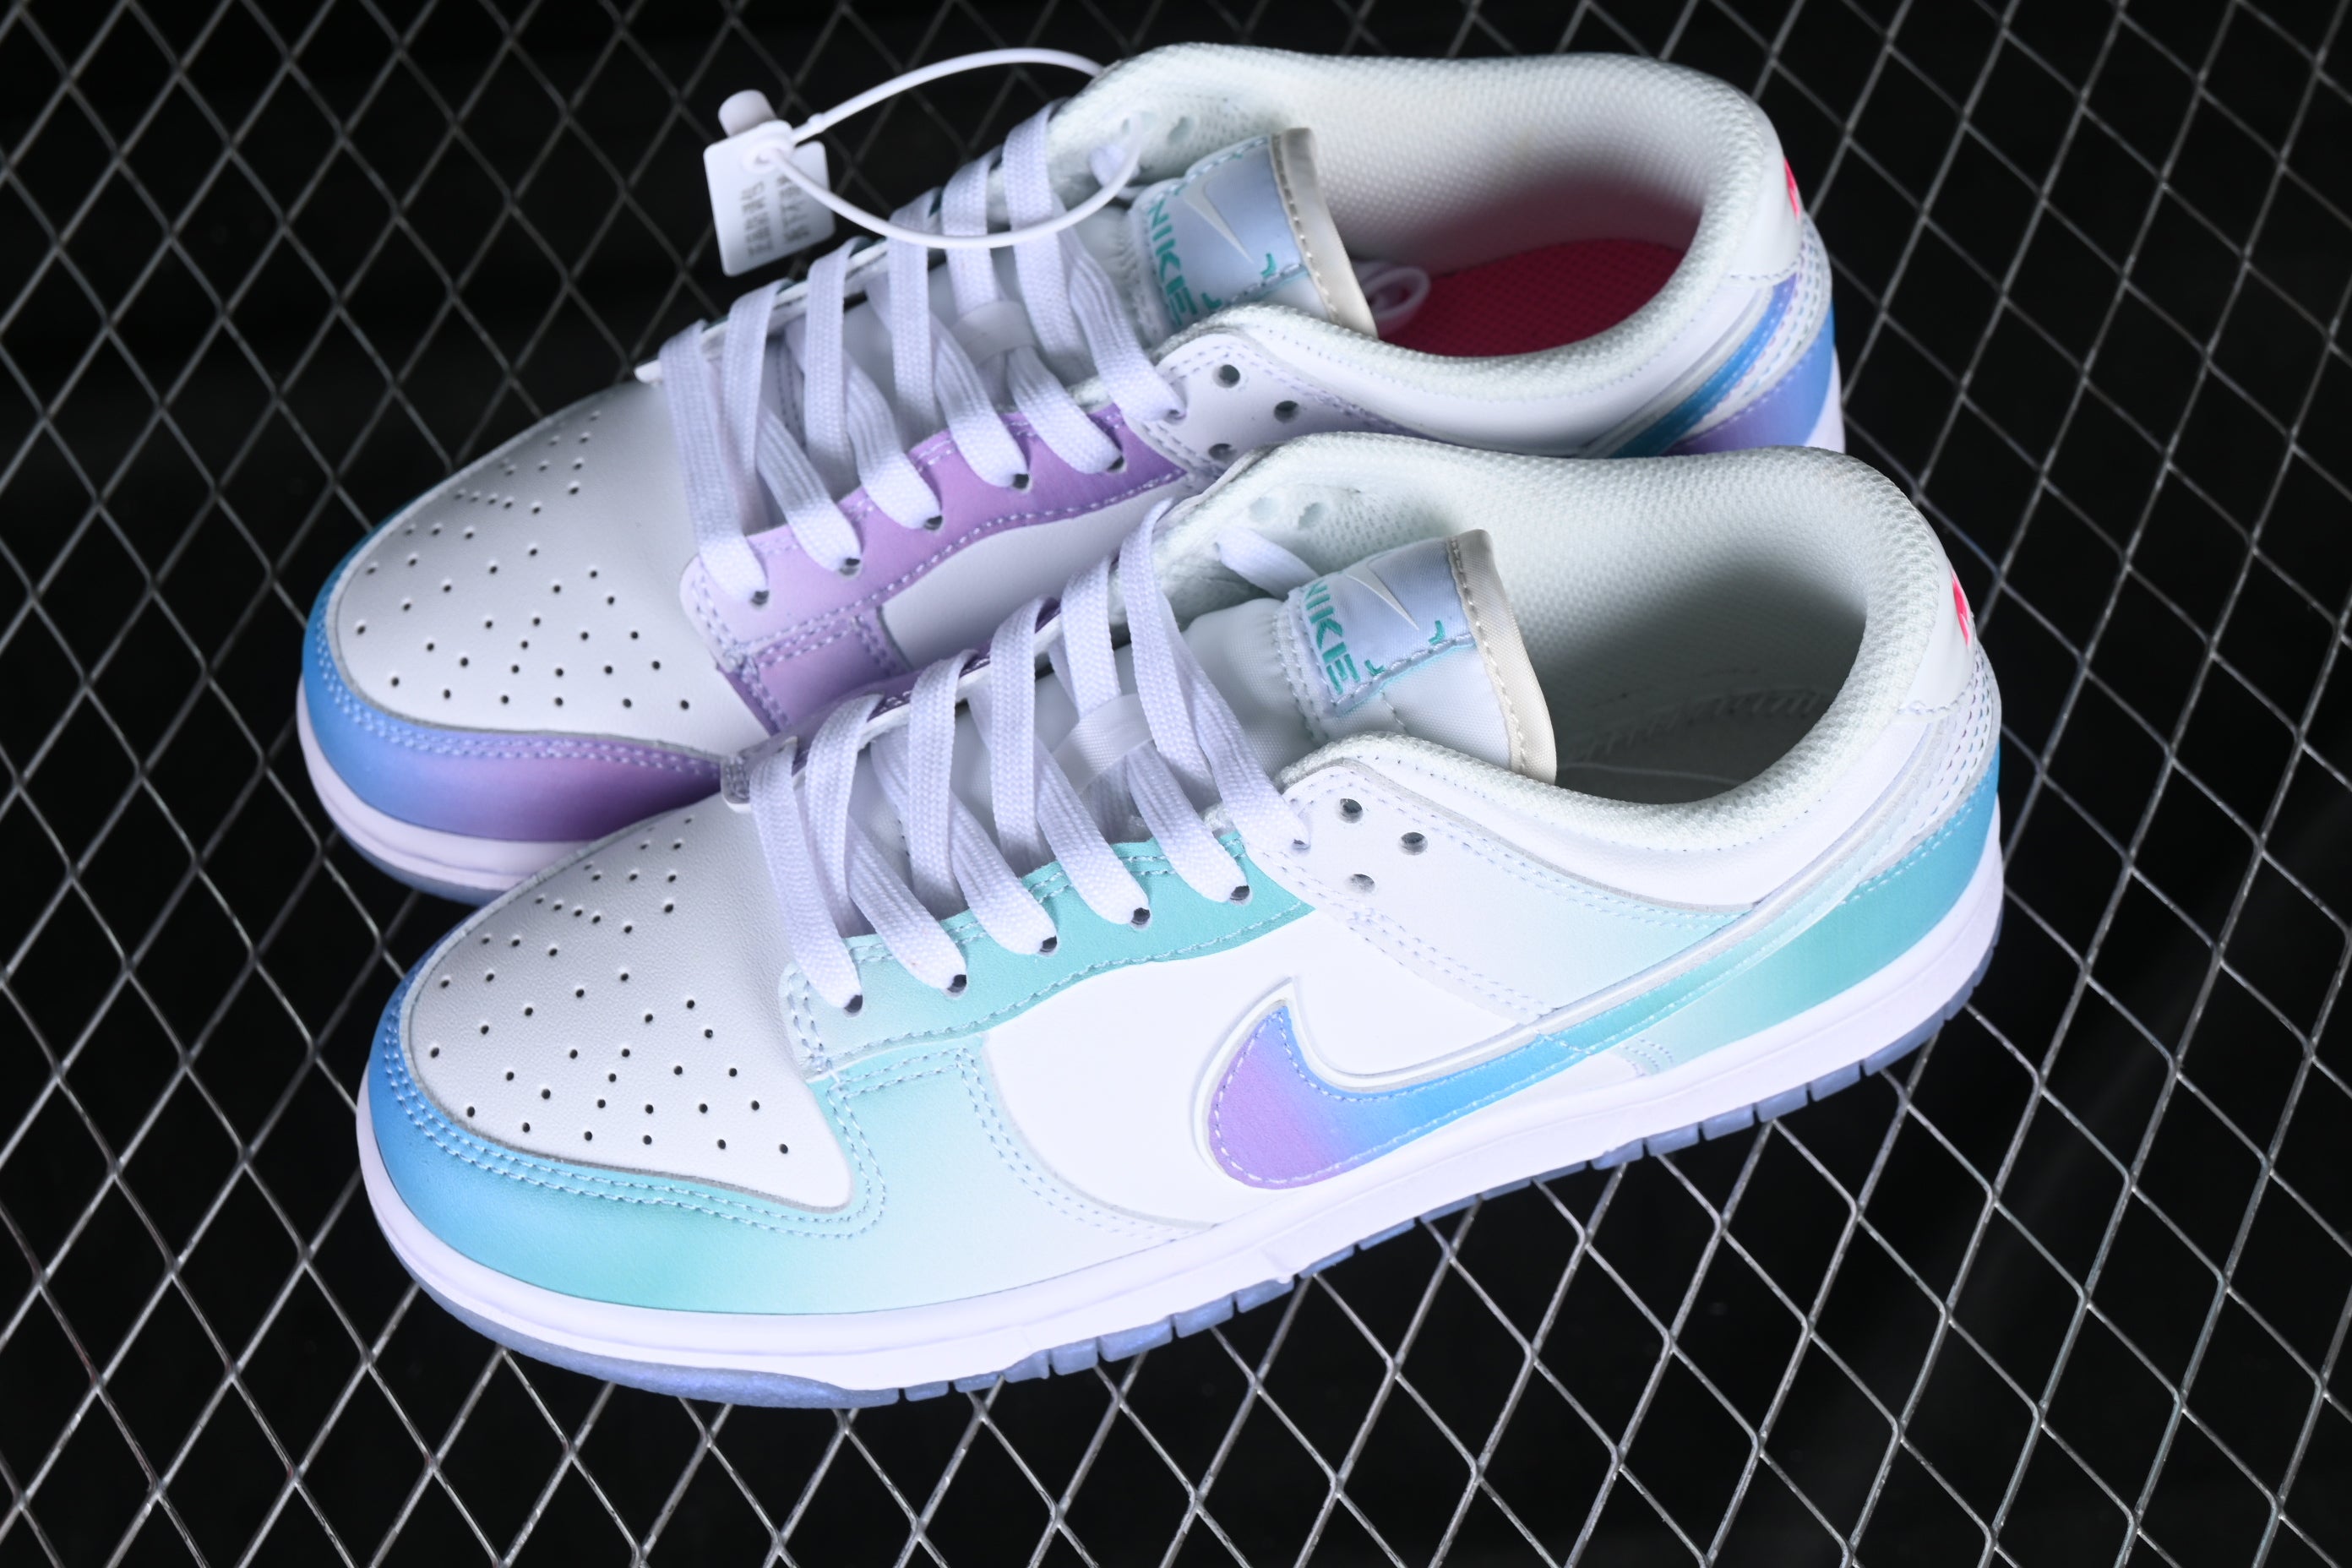 Dunk Low "Violet and Hyper Pink"